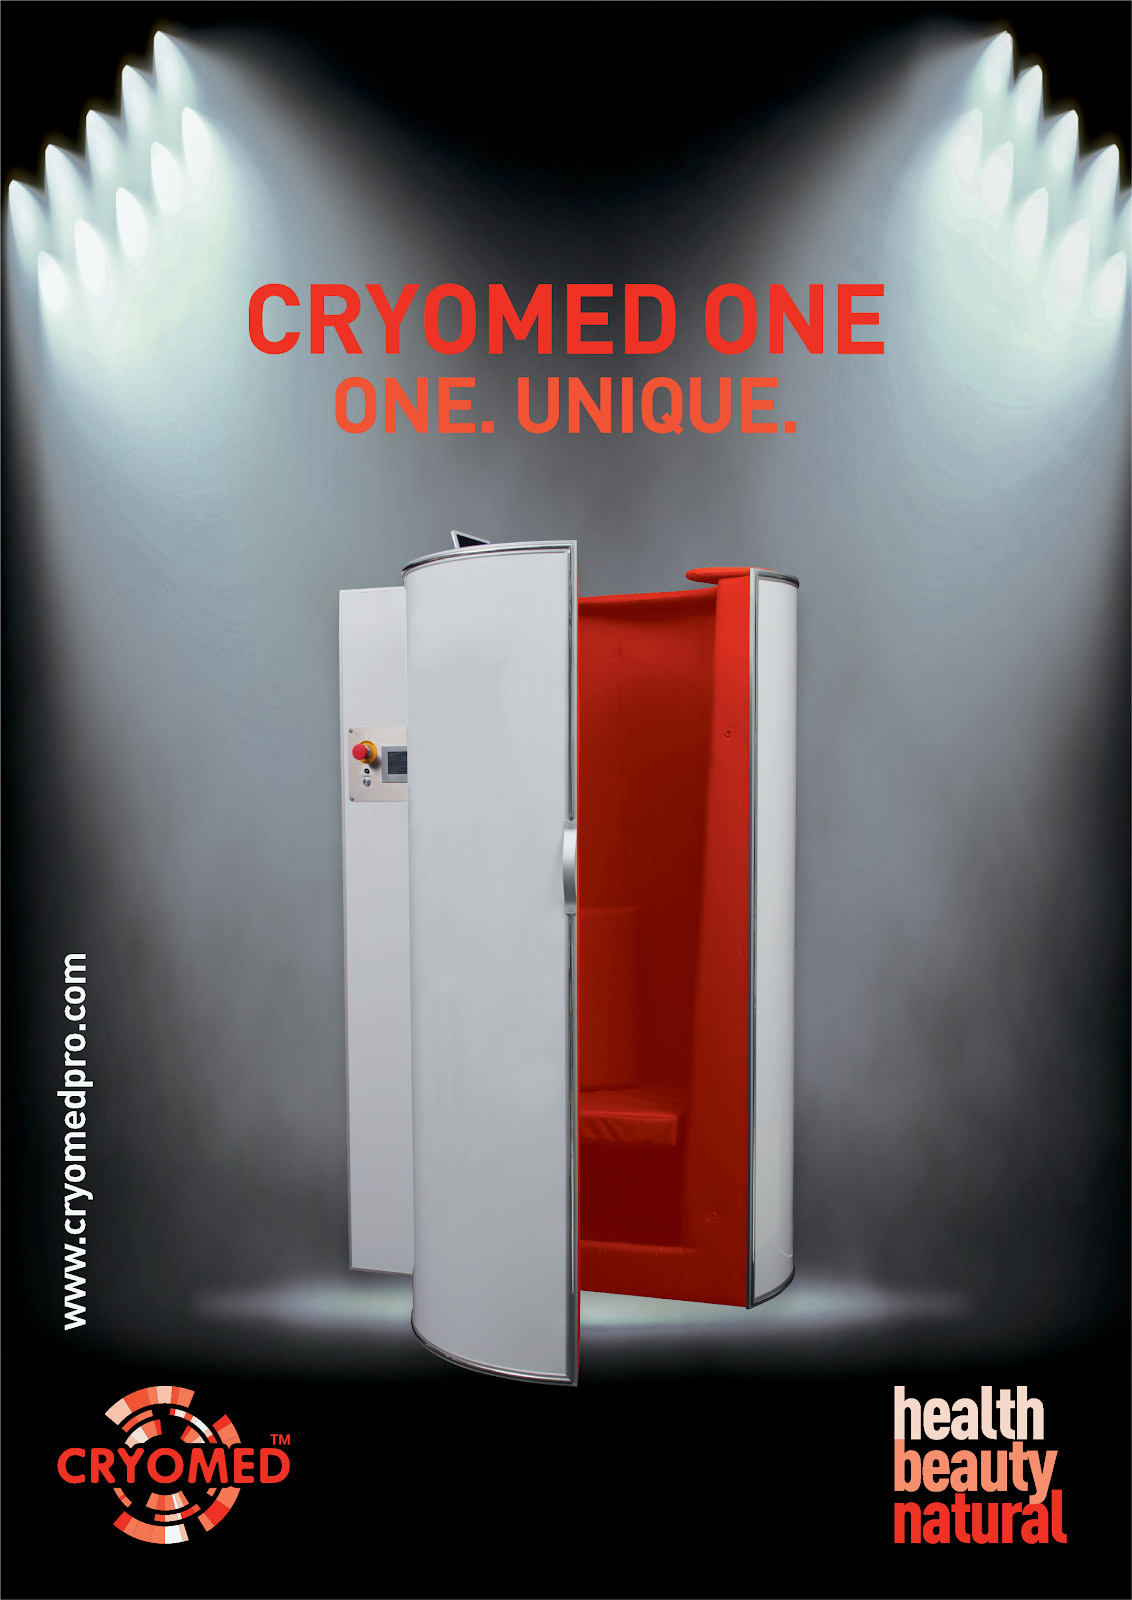 Poster Cryomed A0 - 20 euro